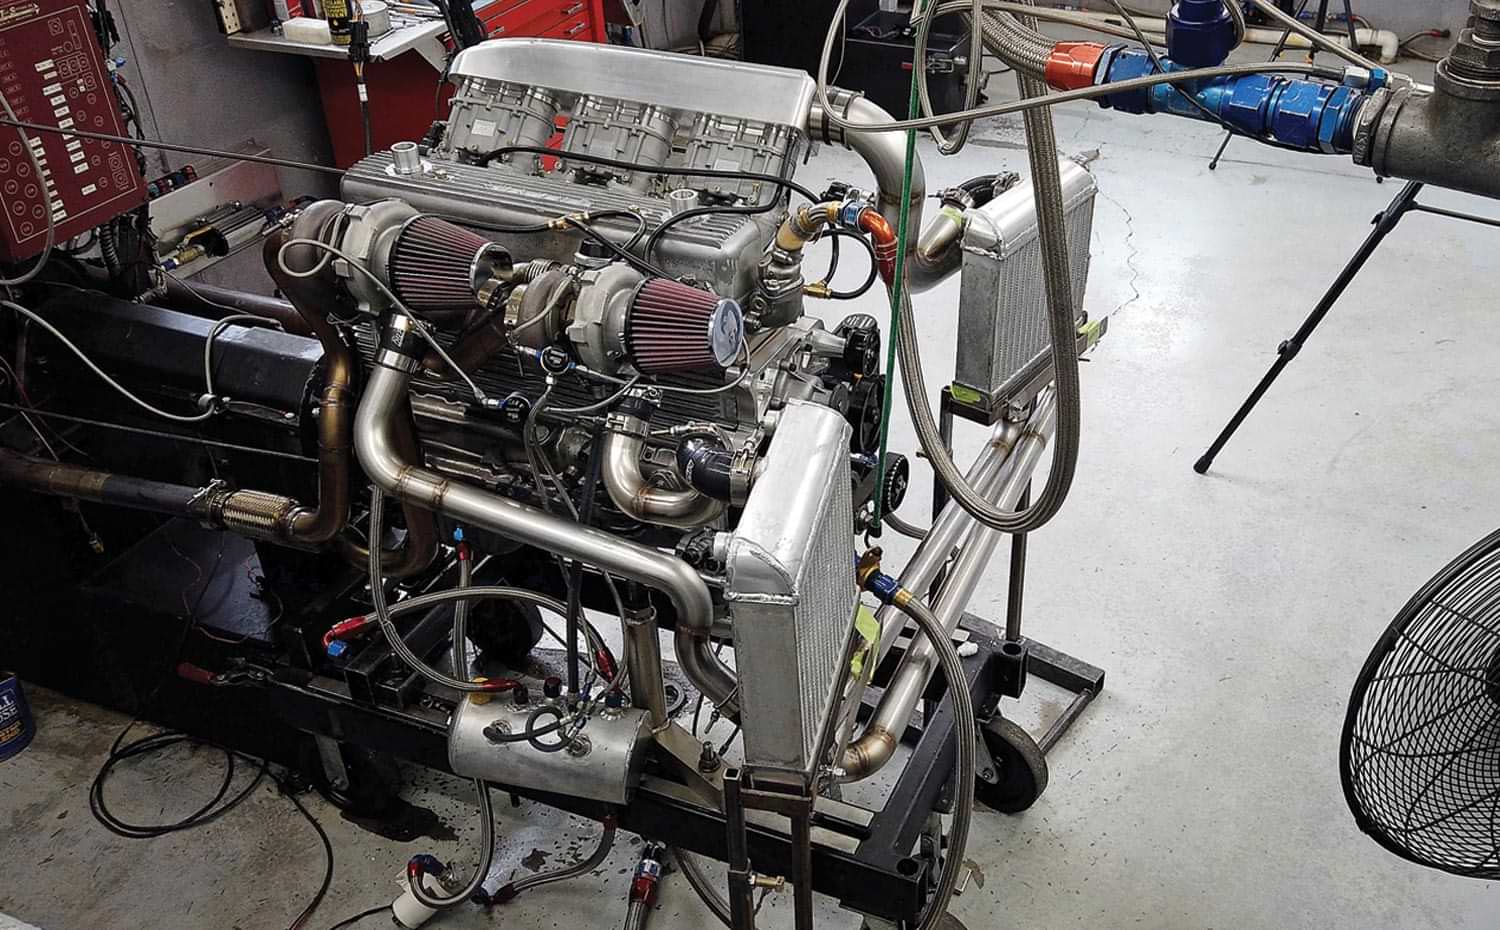 the engine on the dyno complete with both turbos and twin air-to-air intercoolers